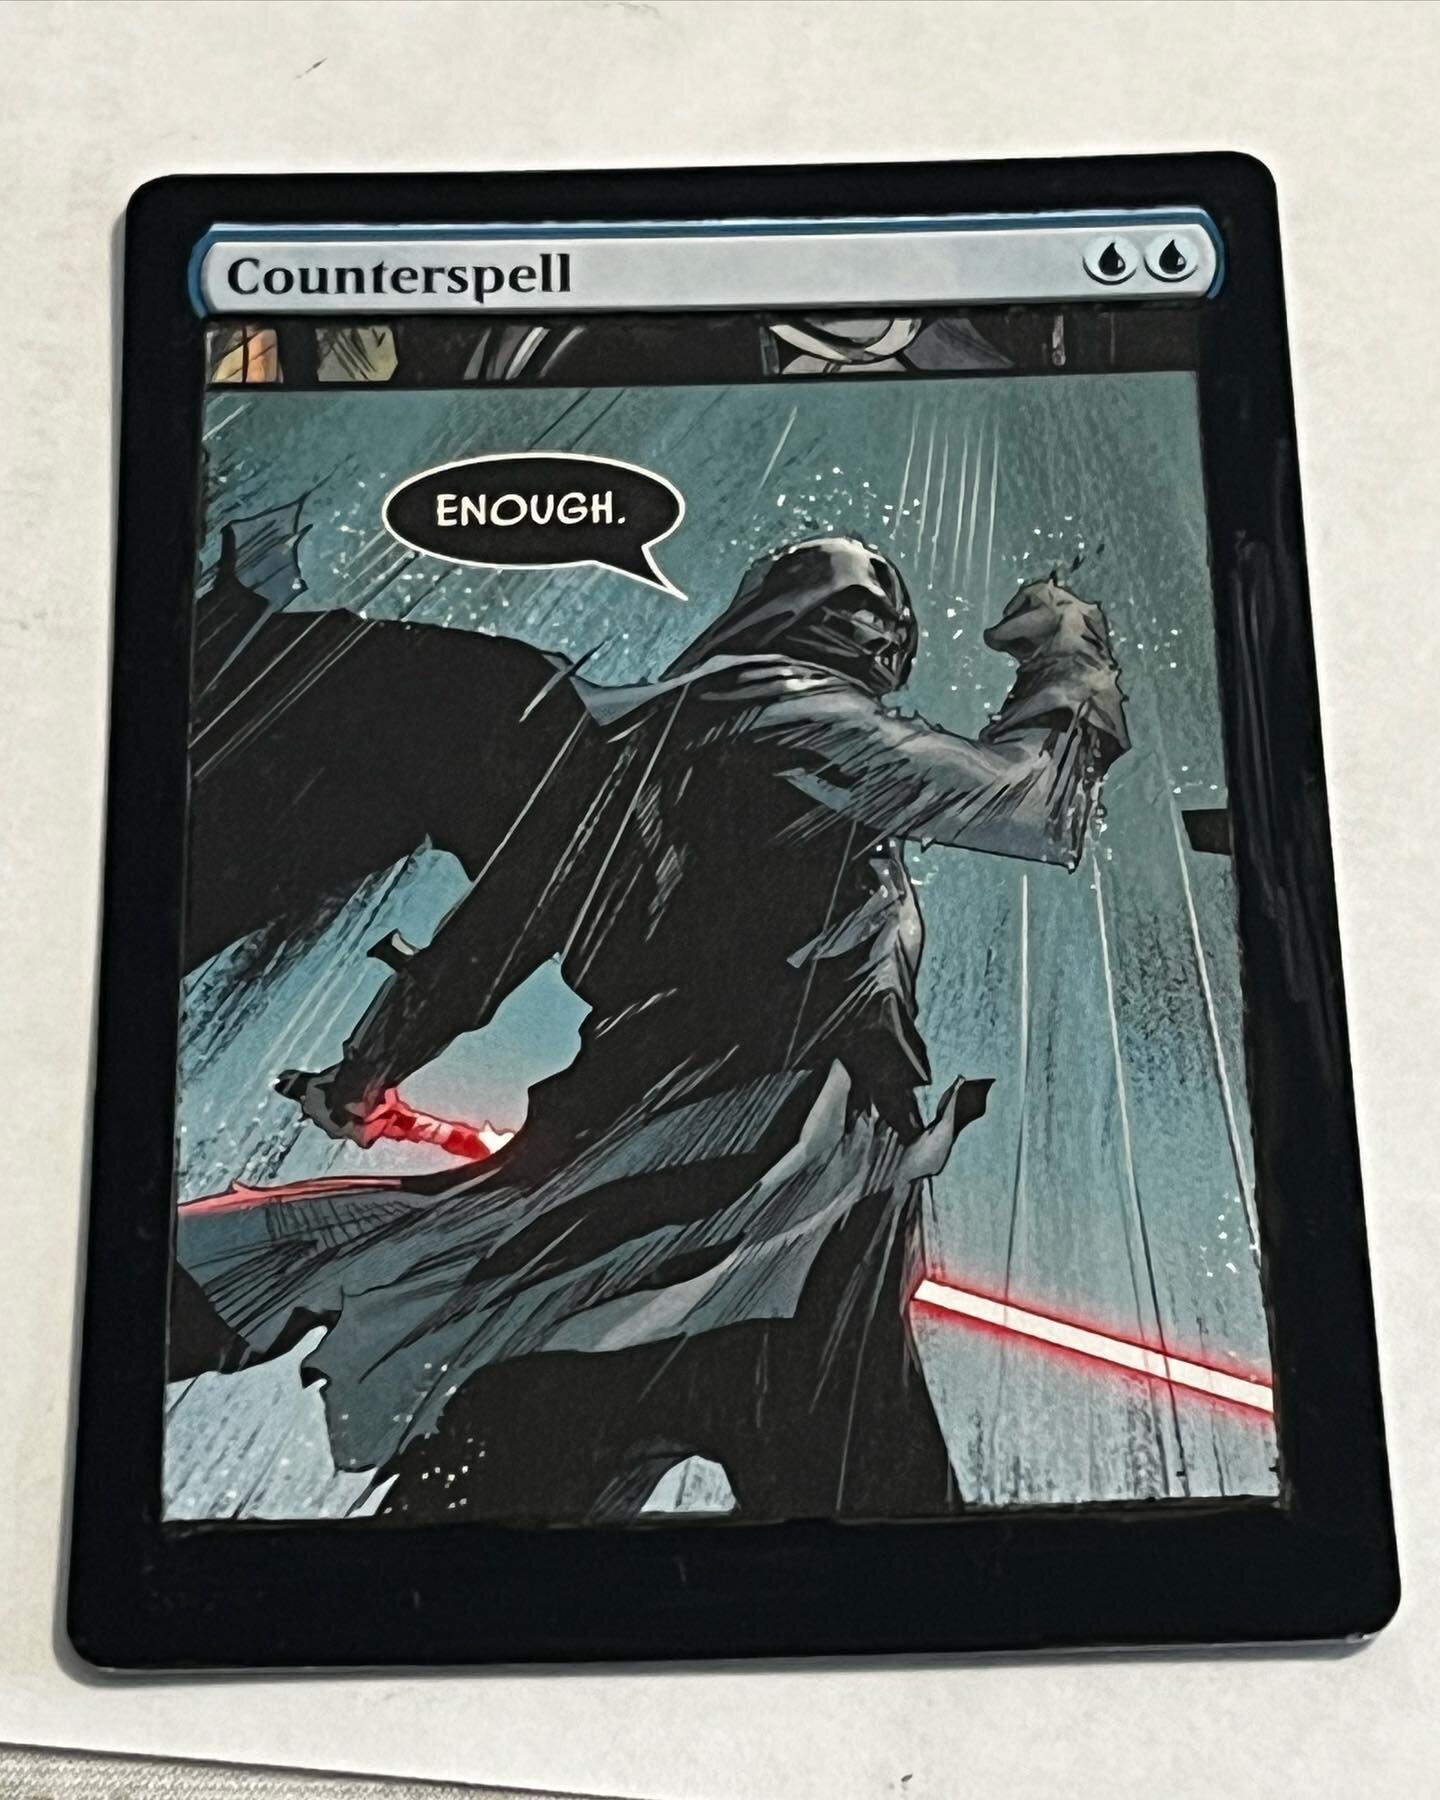 Tried my hand at some comic peel alters recently! Super fun and I&rsquo;m pretty happy with the results. 
Thank you @ghstproductions for the tips on getting started :)

#mtg #mtgcommunity #magicthegathering #comicpeels #custommtgcards #starwars #carn